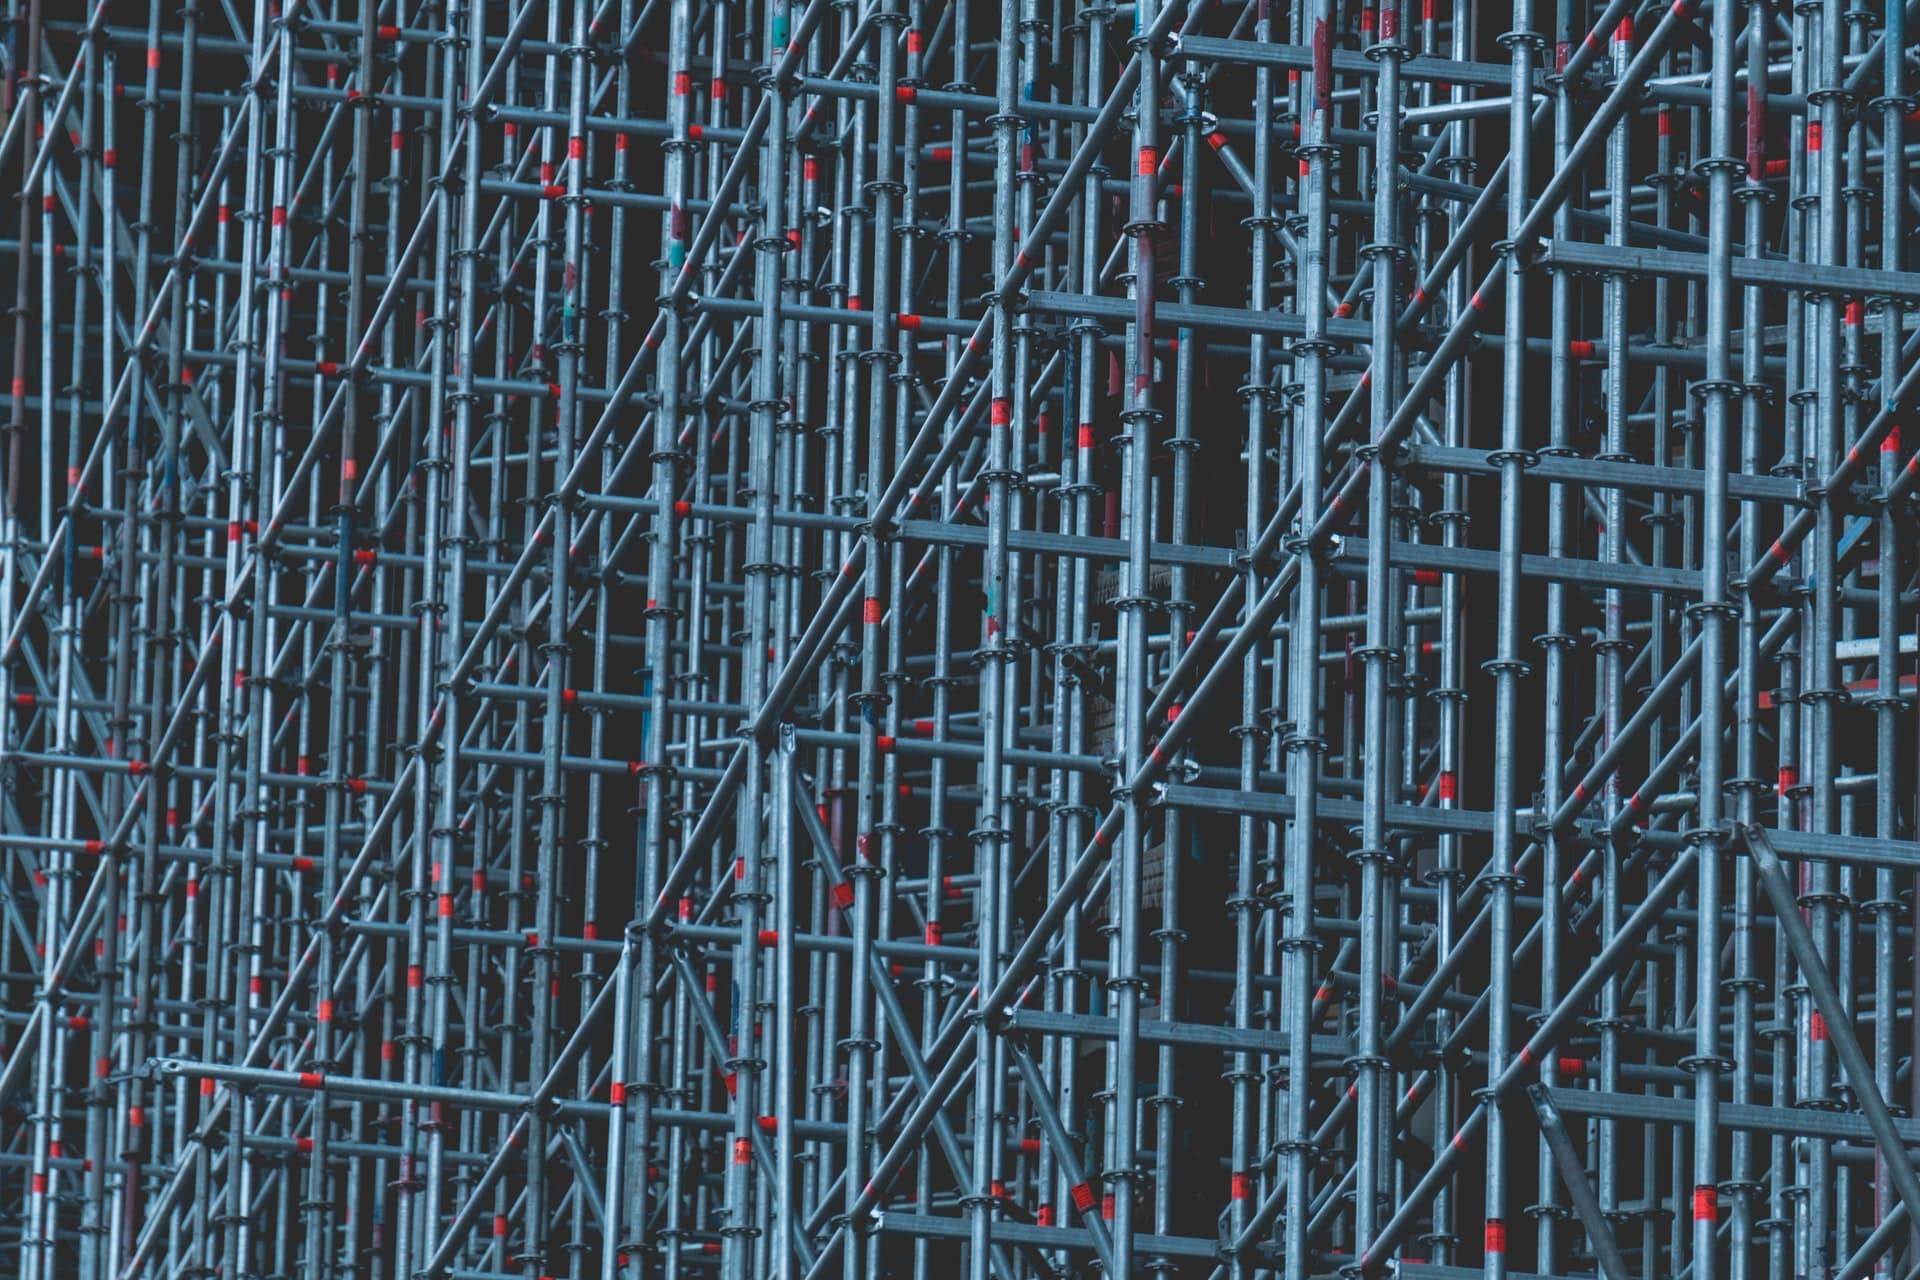 Scaffolding with red tags